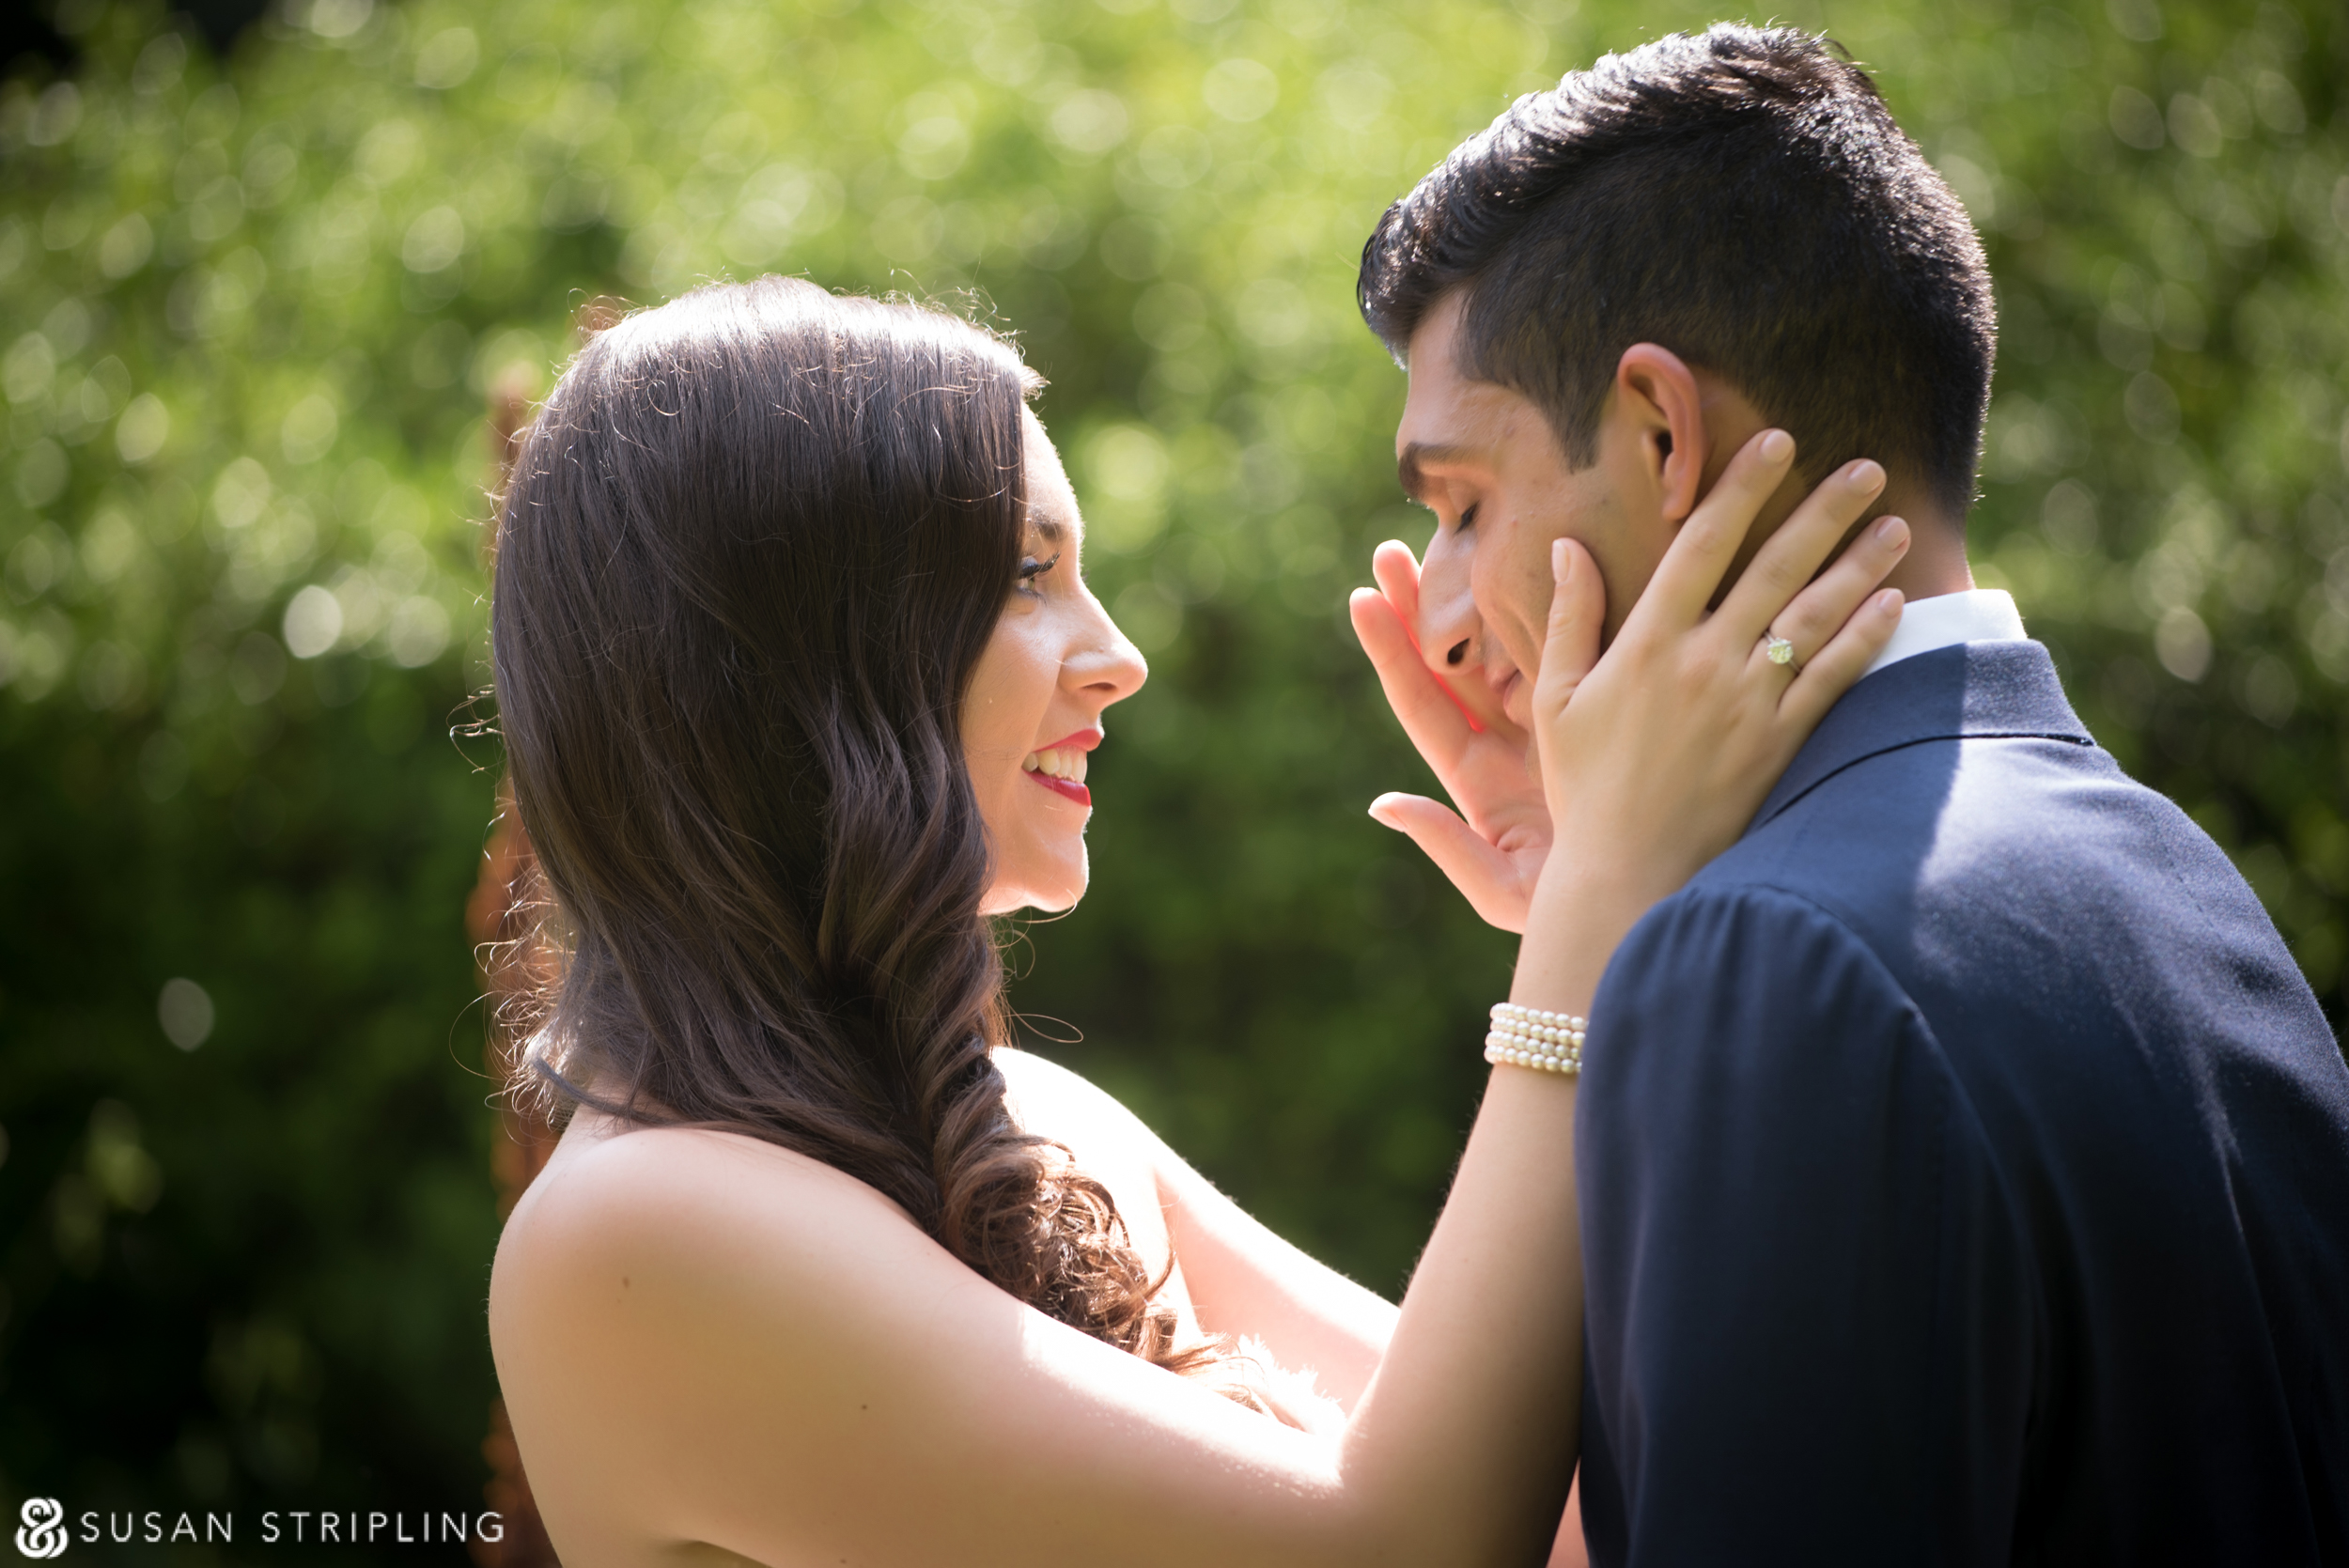 A summer wedding at the Brooklyn Botanic Garden, with the bride and groom gazes lovingly at each other.